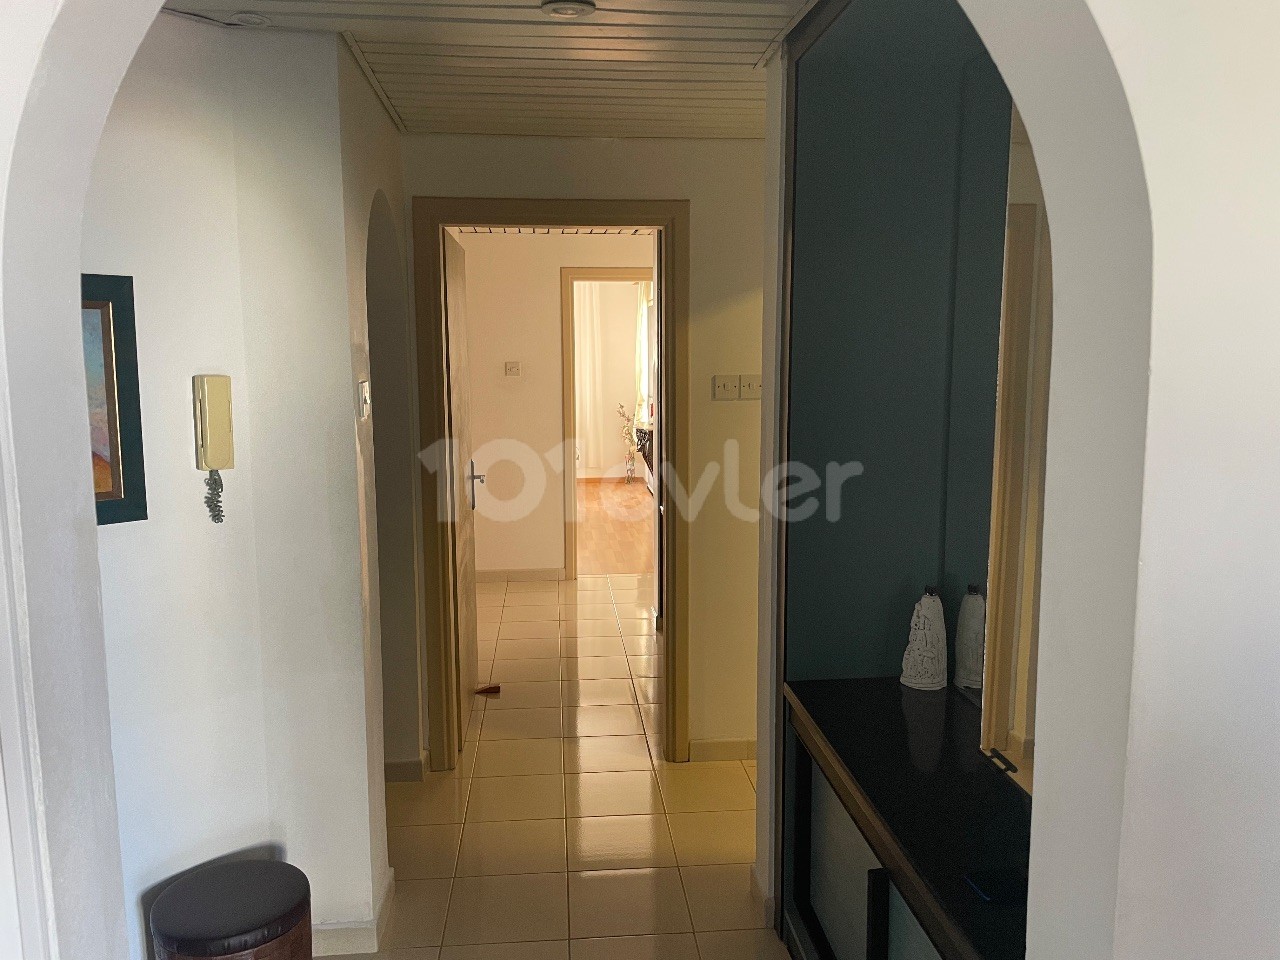 3+1 Apartments for rent in Kashkar Court district of Kyrenia ** 